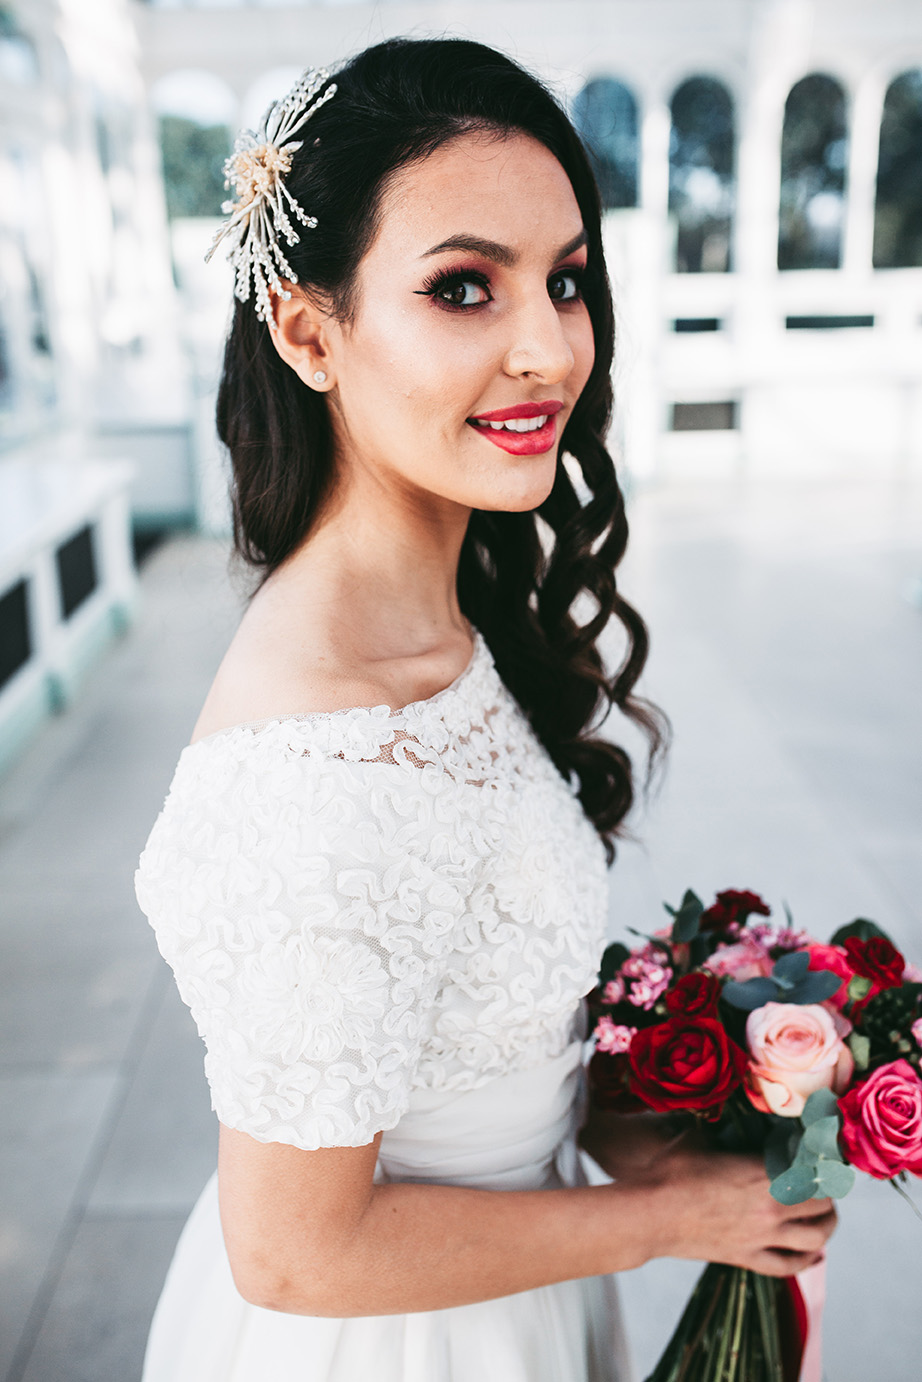 The wedding makeup was done with long lashes, with a bright lipstick and pink shadows